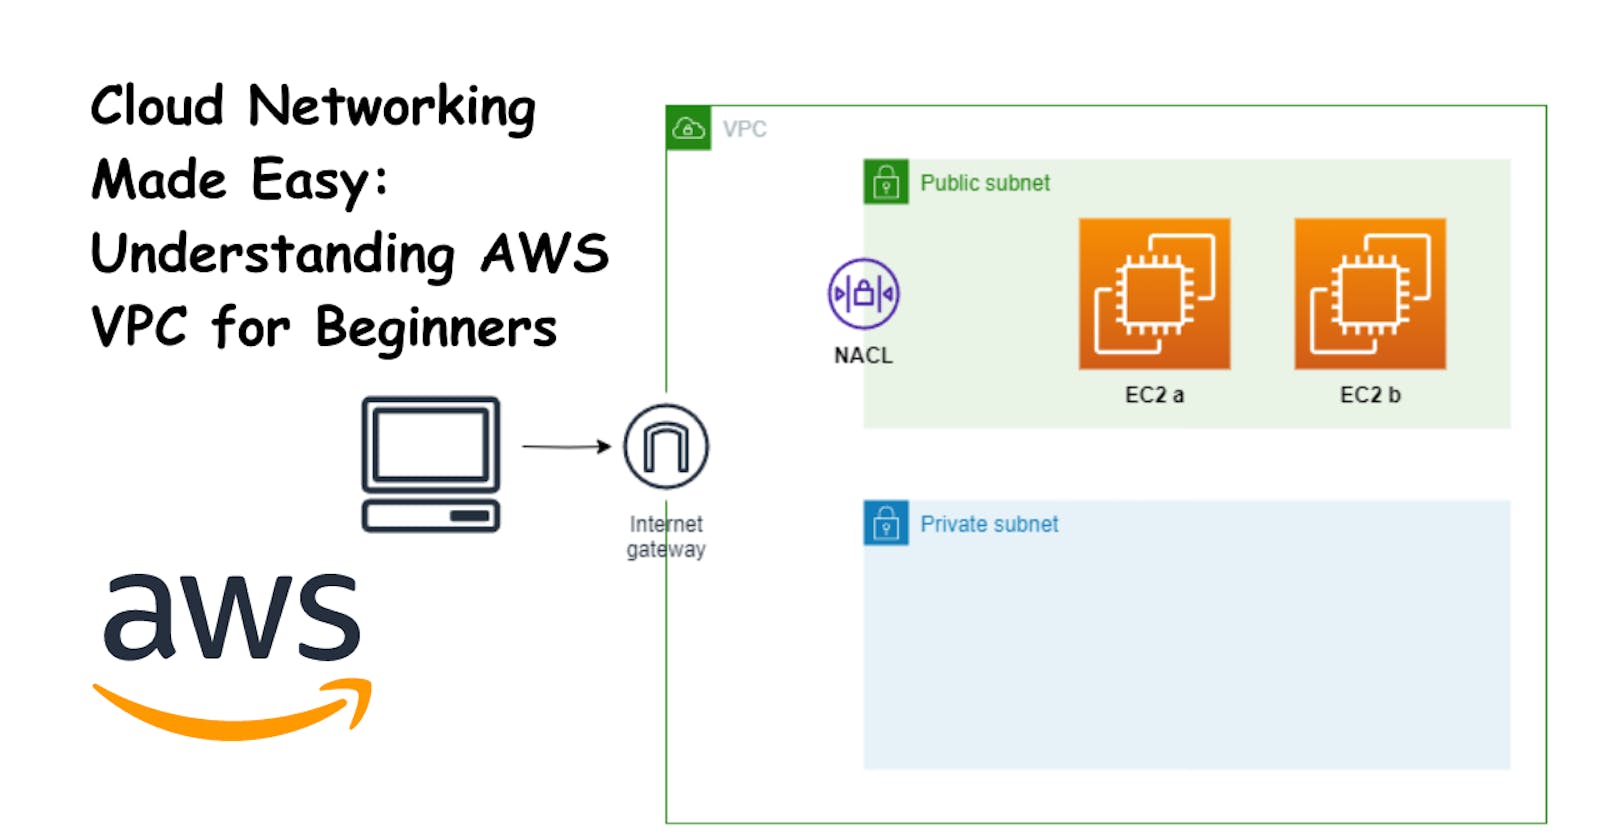 Cloud Networking Made Easy: Understanding AWS VPC for Beginners